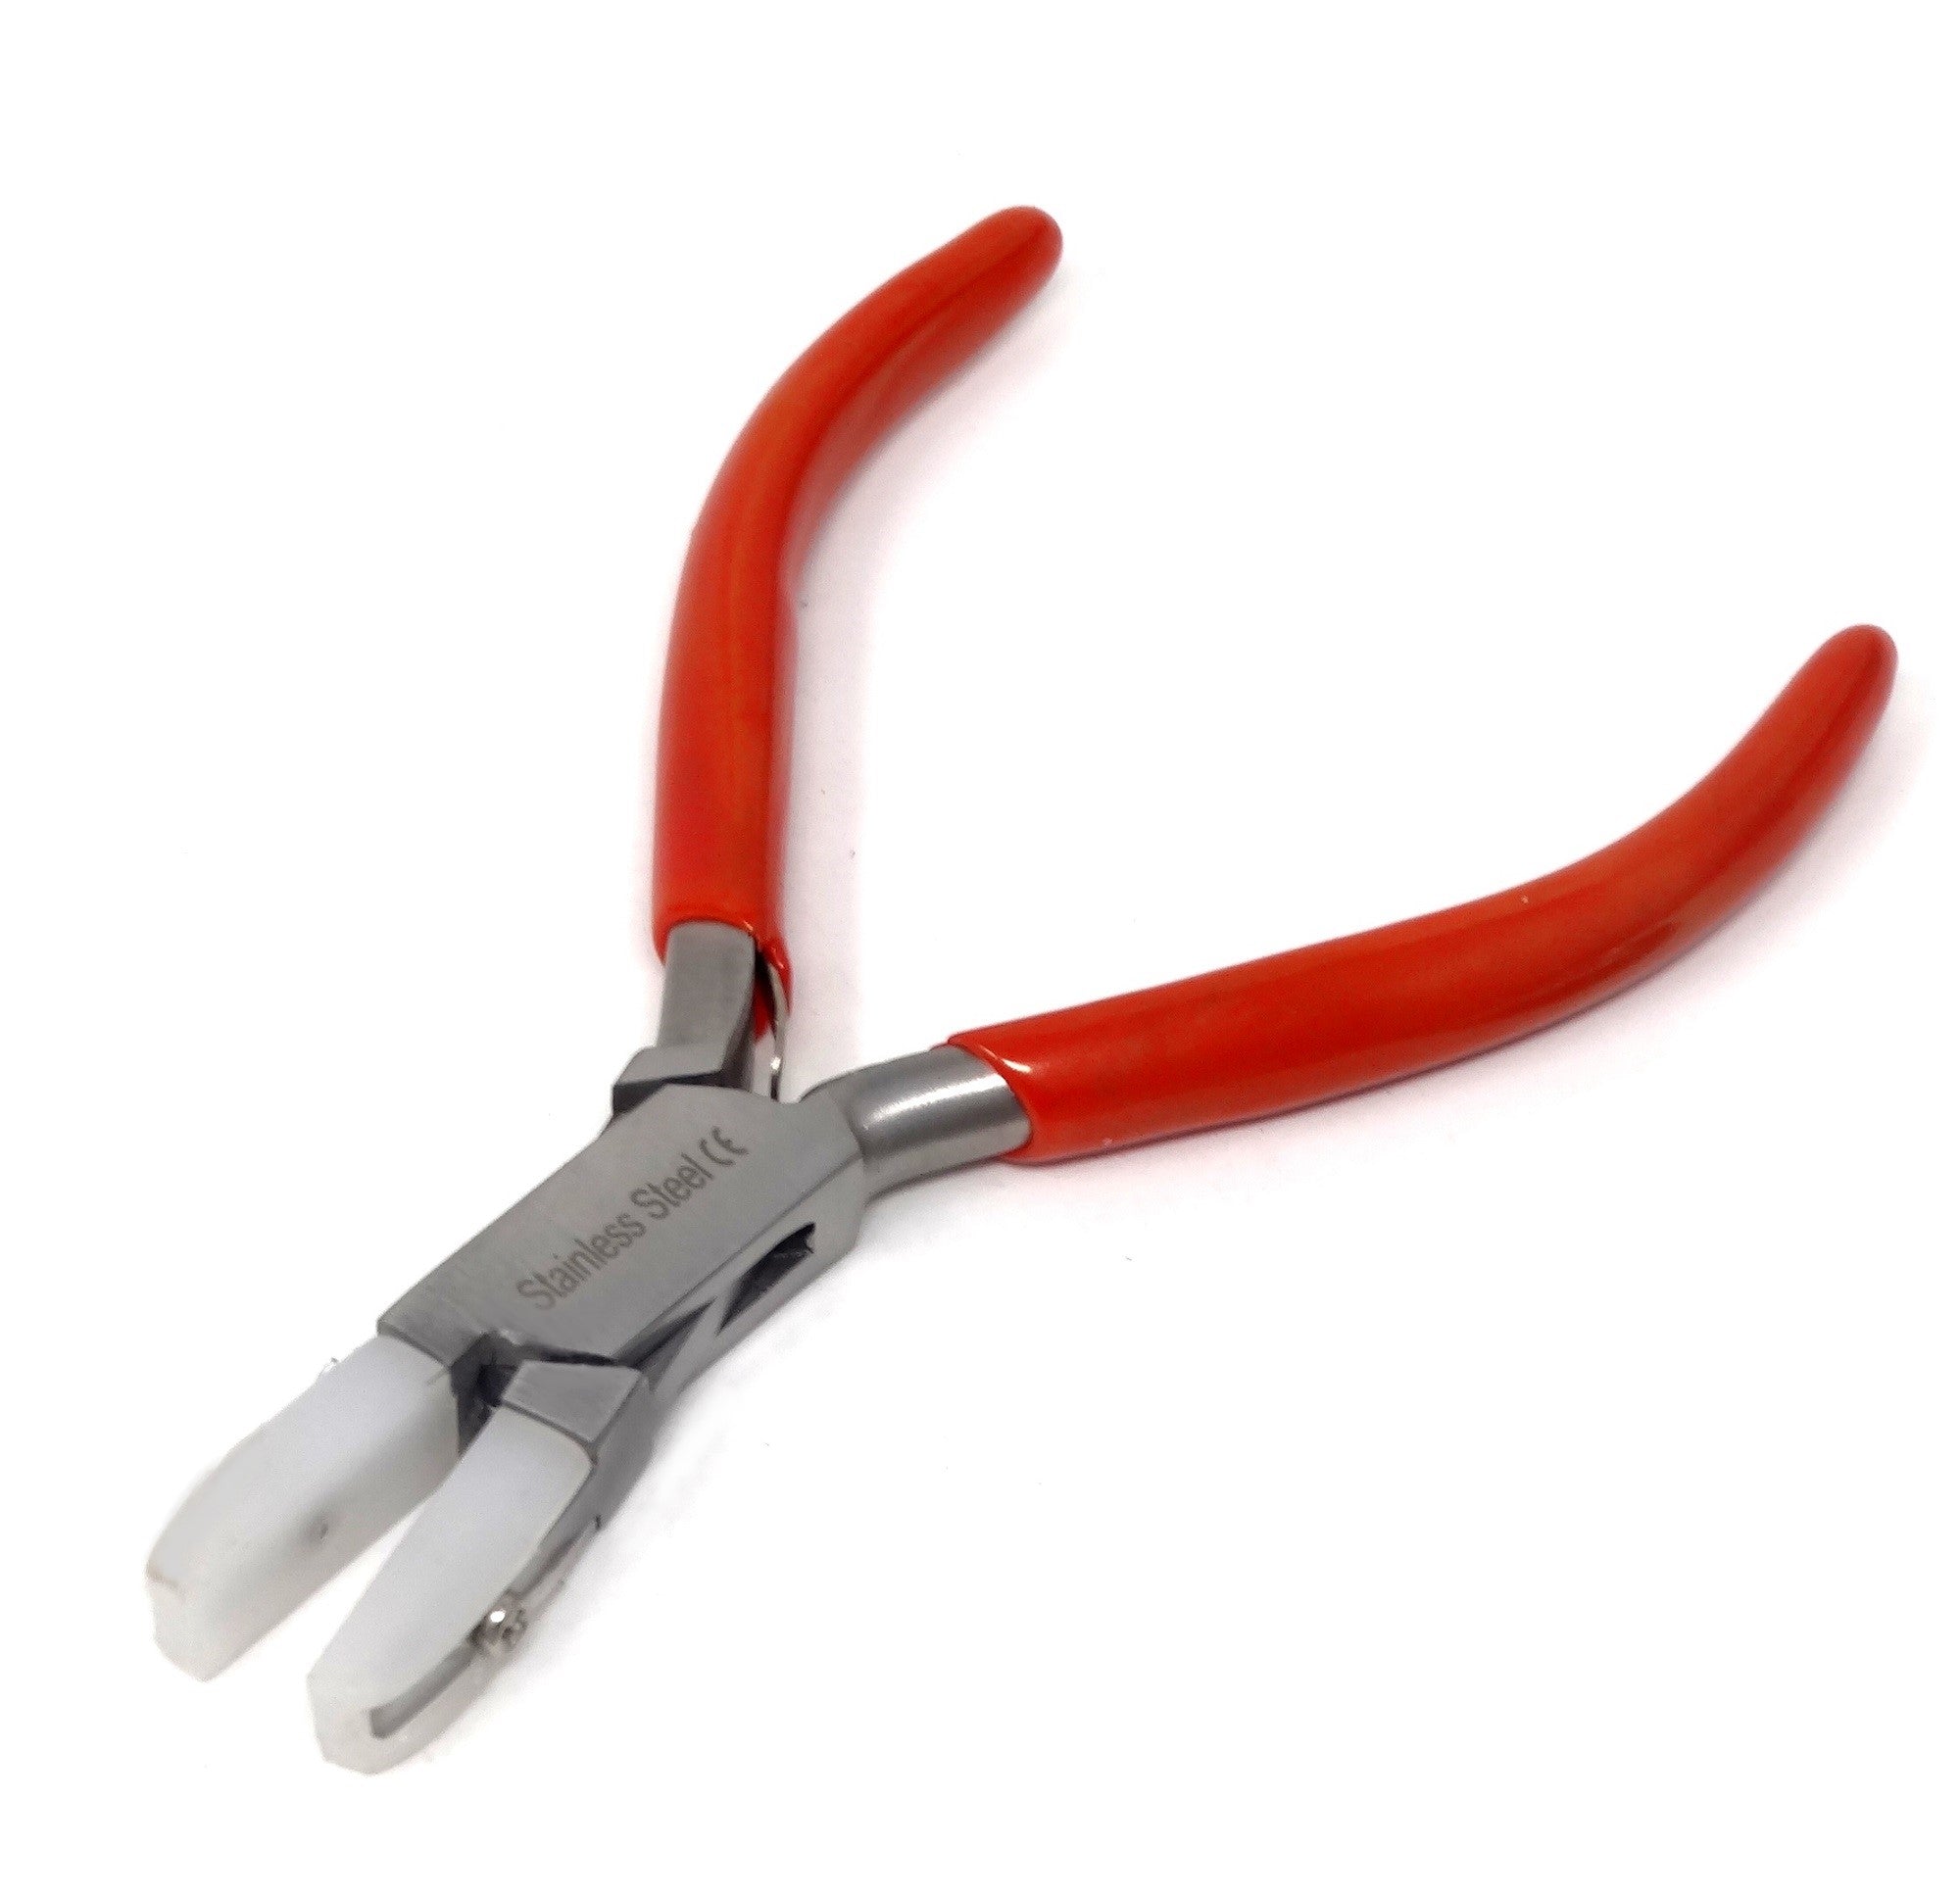 AAProTools Nylon Jaw Chain Nose Pliers 4 1/2 Non-marring Wire Wrapping  Jewelry Tool (Optical Red)